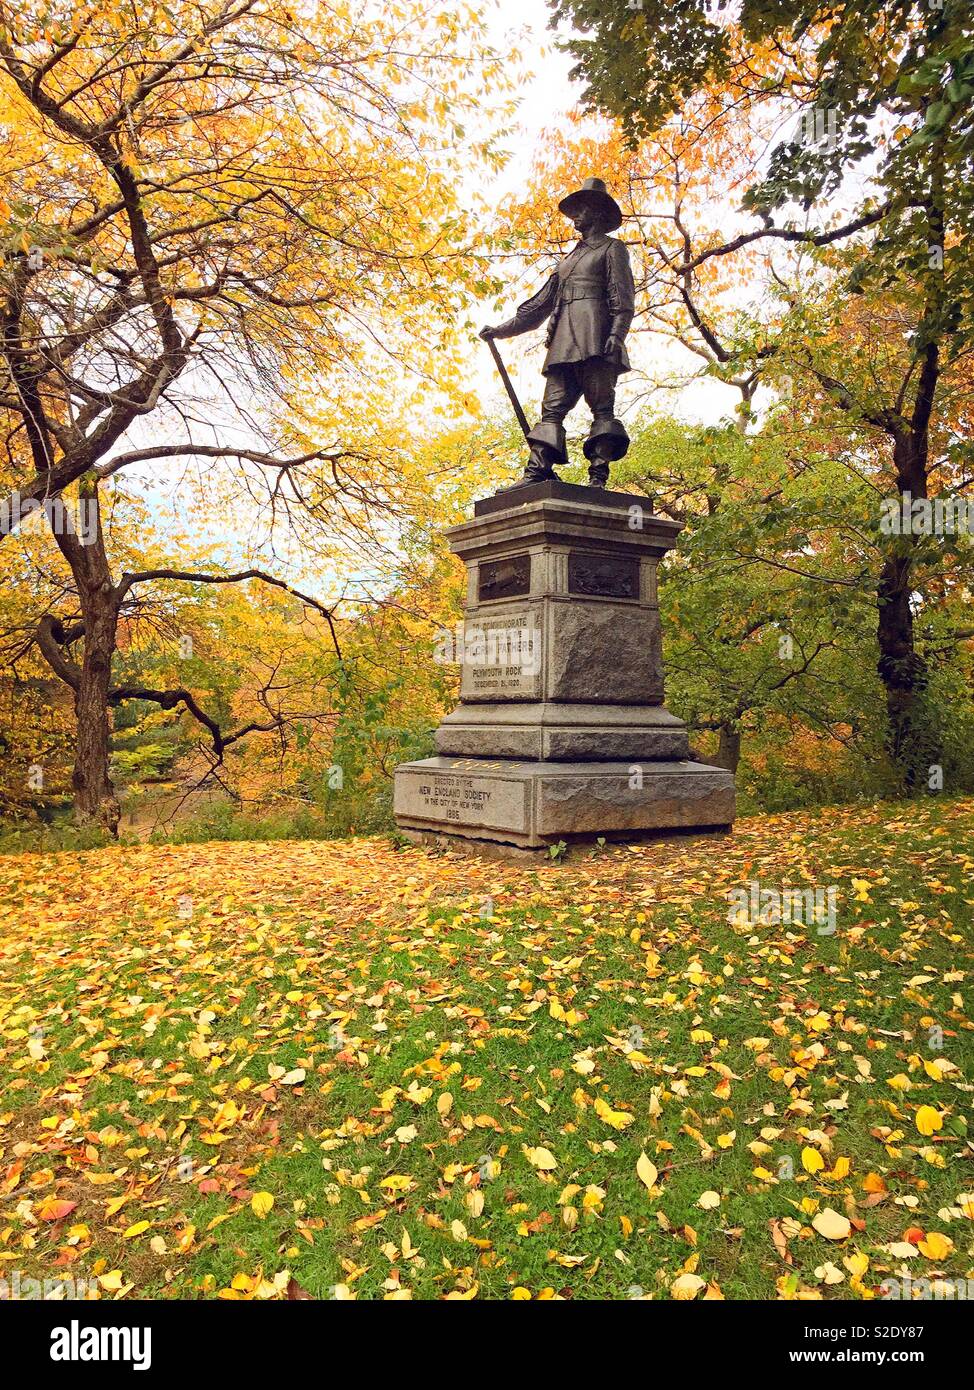 The mayflower descendent statue on Pilgrim Hill in central park on a bright fall day, NYC, USA Stock Photo